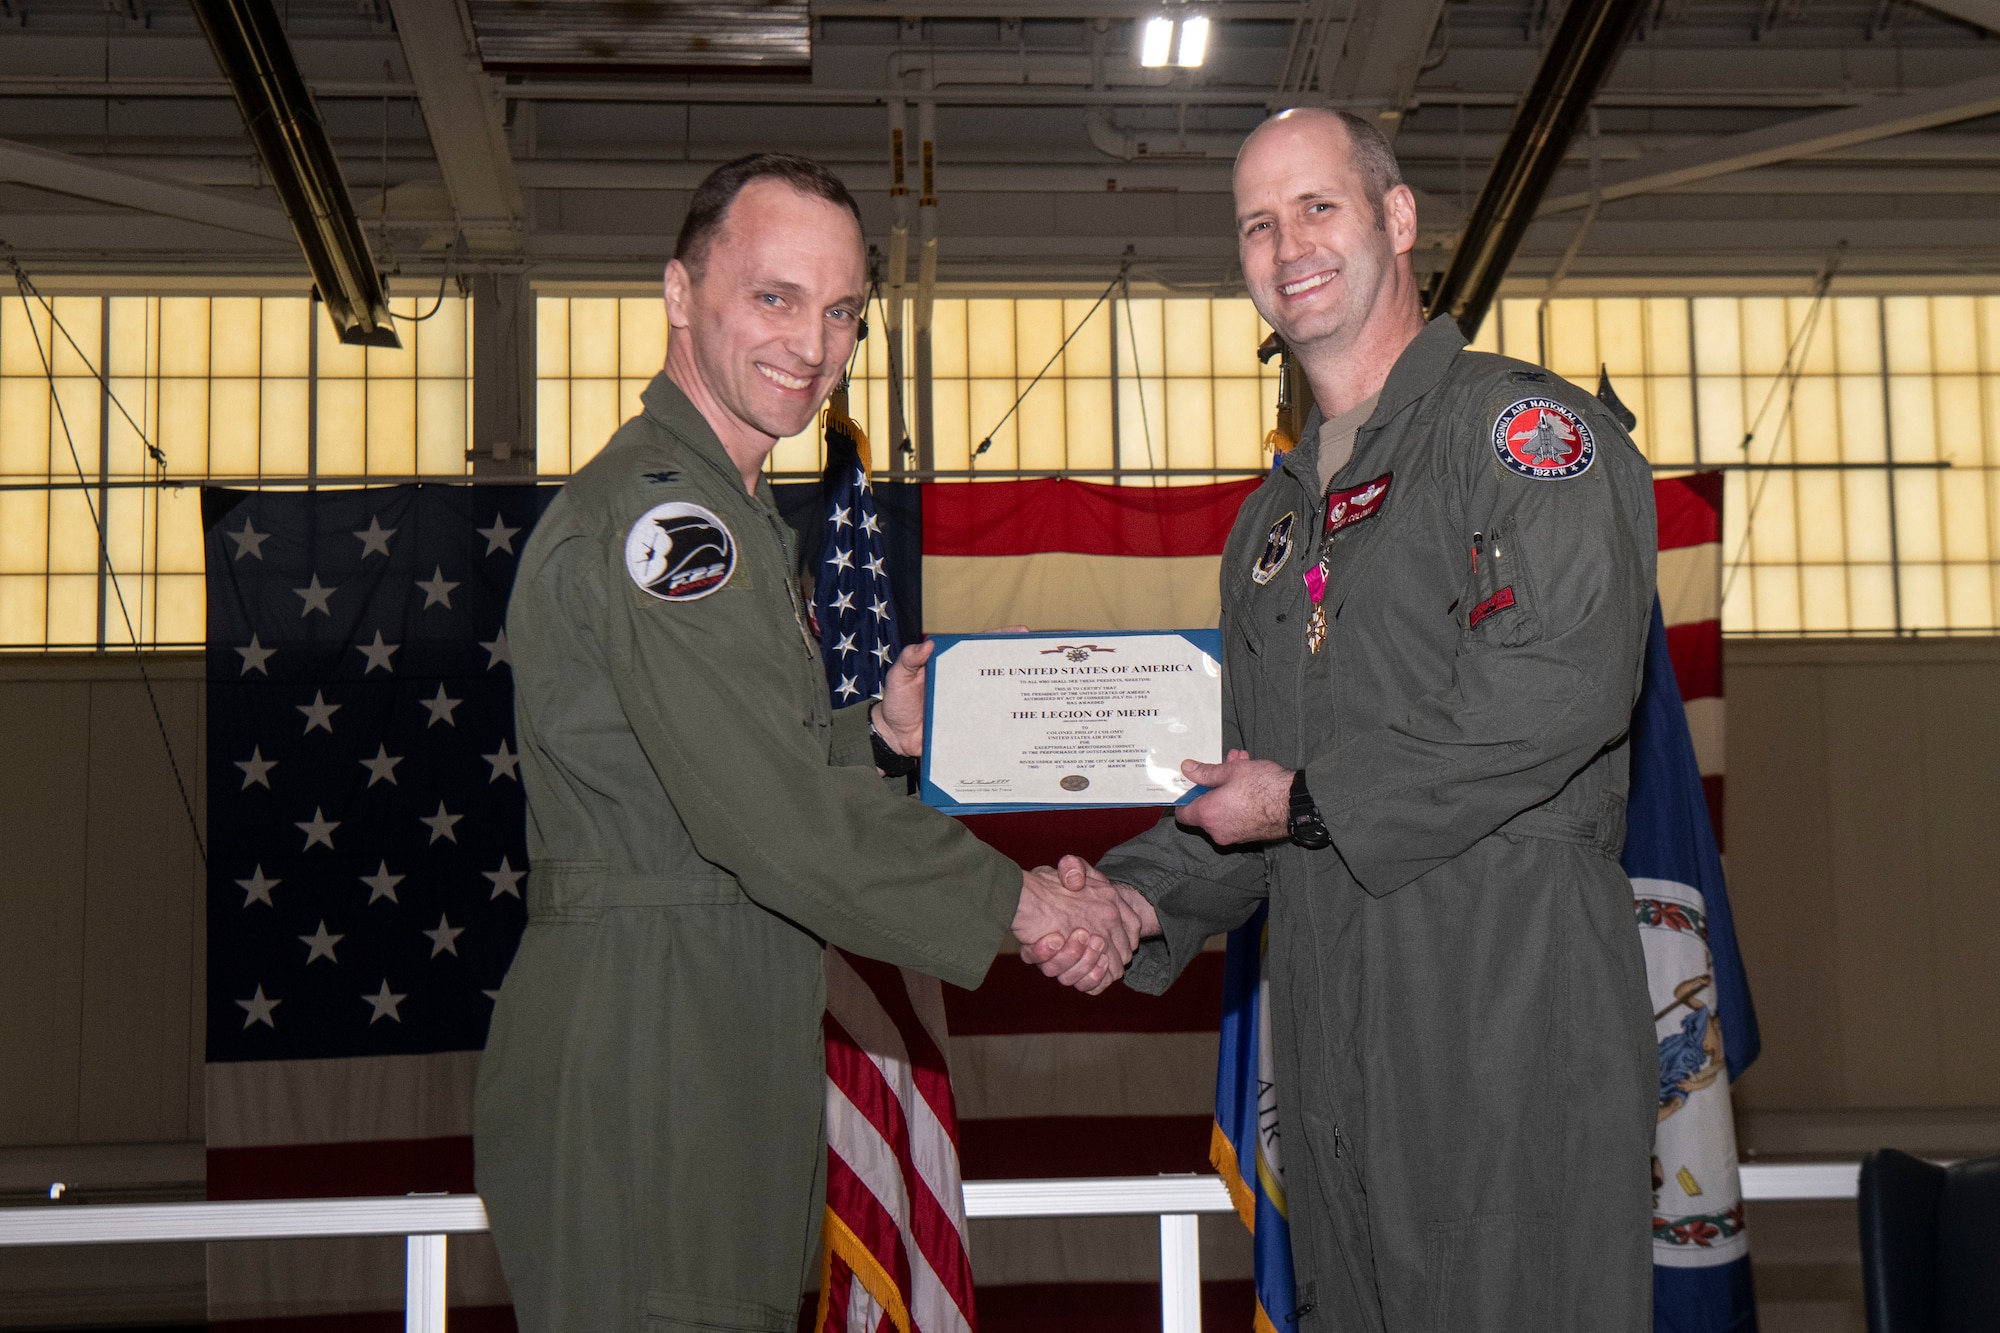 2 Air Force officers holding Legion of Merit certificate